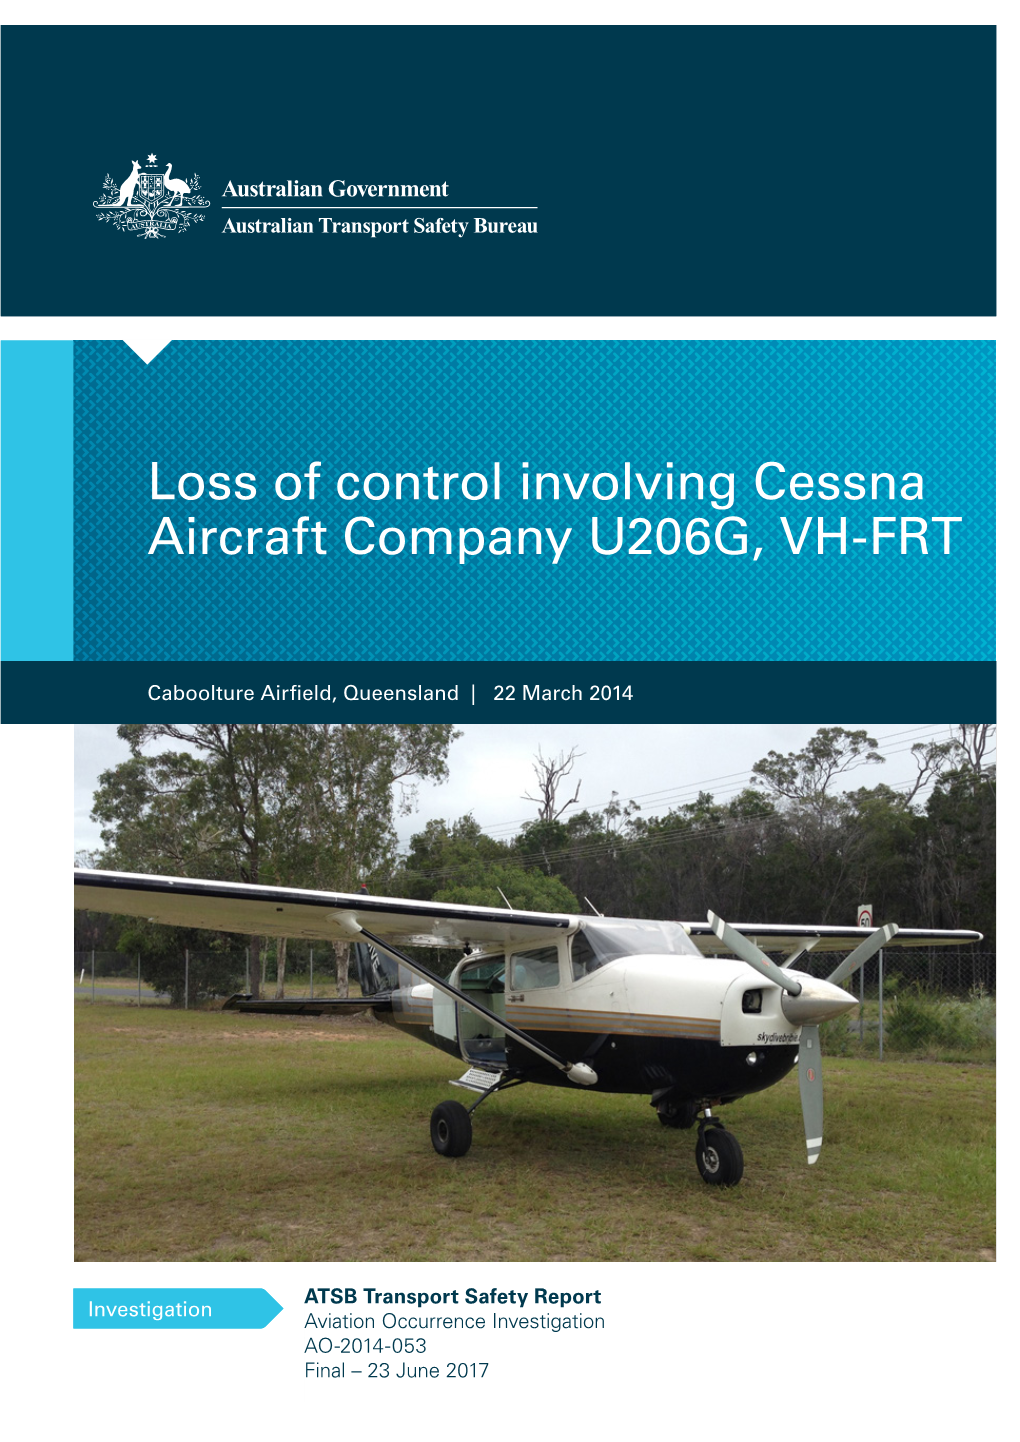 Loss of Control Involving Cessna Aircraft Company U206G, VH-FRT Caboolture Airfield, Queensland, 22 March 2014